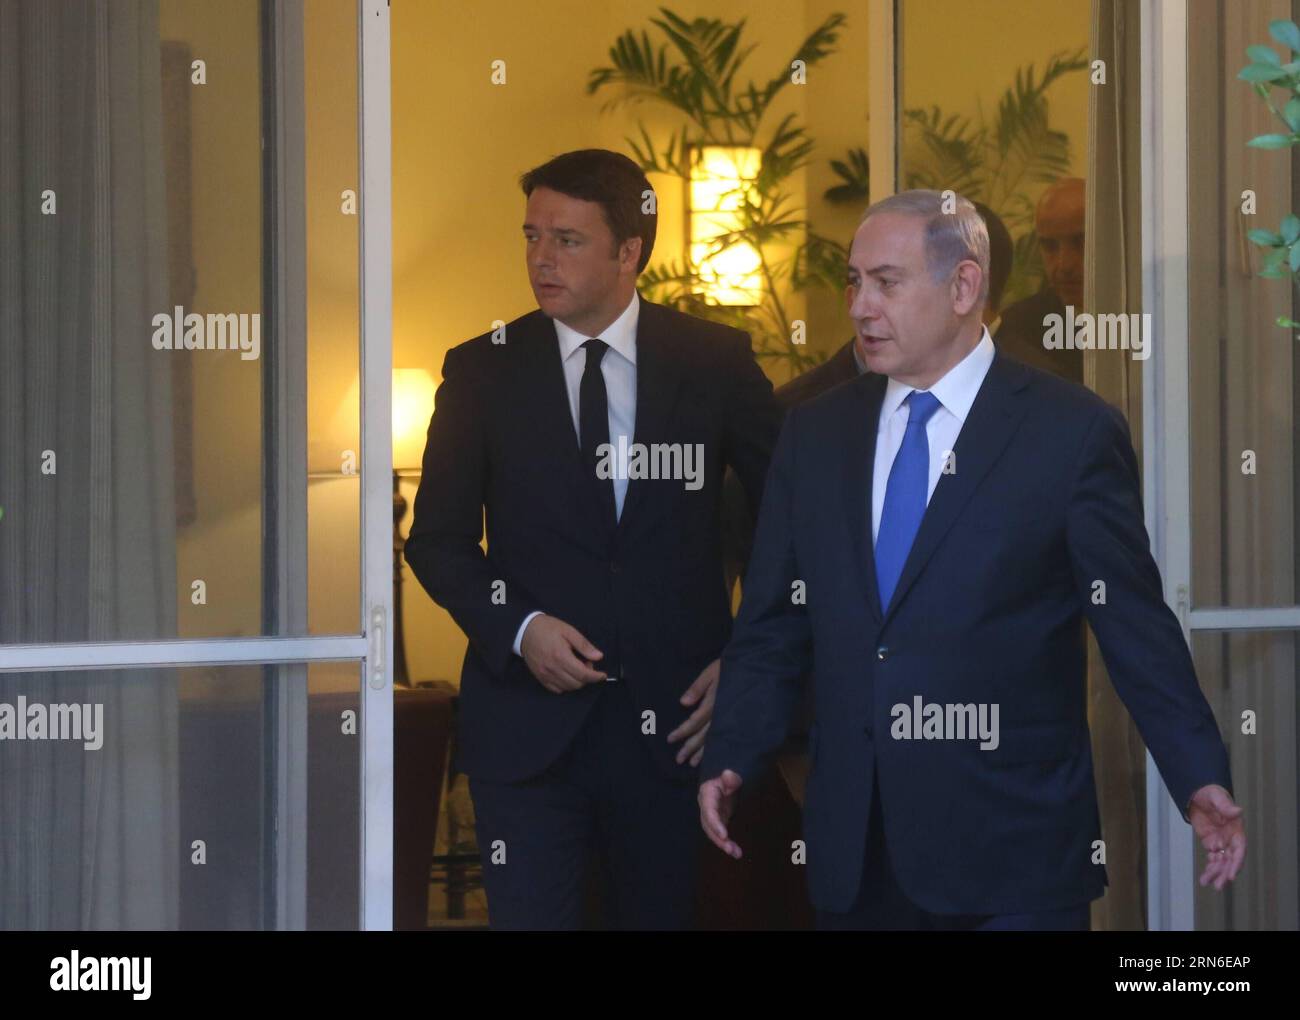 (150722) -- JERUSALEM,  - Israeli Prime Minister Benjamin Netanyahu (R) and his Italian counterpart Matteo Renzi arrive for a joint press conference at Israeli Prime Minister s residence in Jerusalem, on July 21, 2015. Israeli Prime Minister Benjamin Netanyahu met Tuesday in Jerusalem with his Italian counterpart Matteo Renzi, continuing his criticism on the nuclear deal between the world powers and Tehran. Speaking at a joint press conference, Netanyahu said the deal with Iran poses serious risks to Israel, the Middle East, Europe and the entire world. /POOL/Marc Israel Sellem) MIDEAST-JERUSA Stock Photo